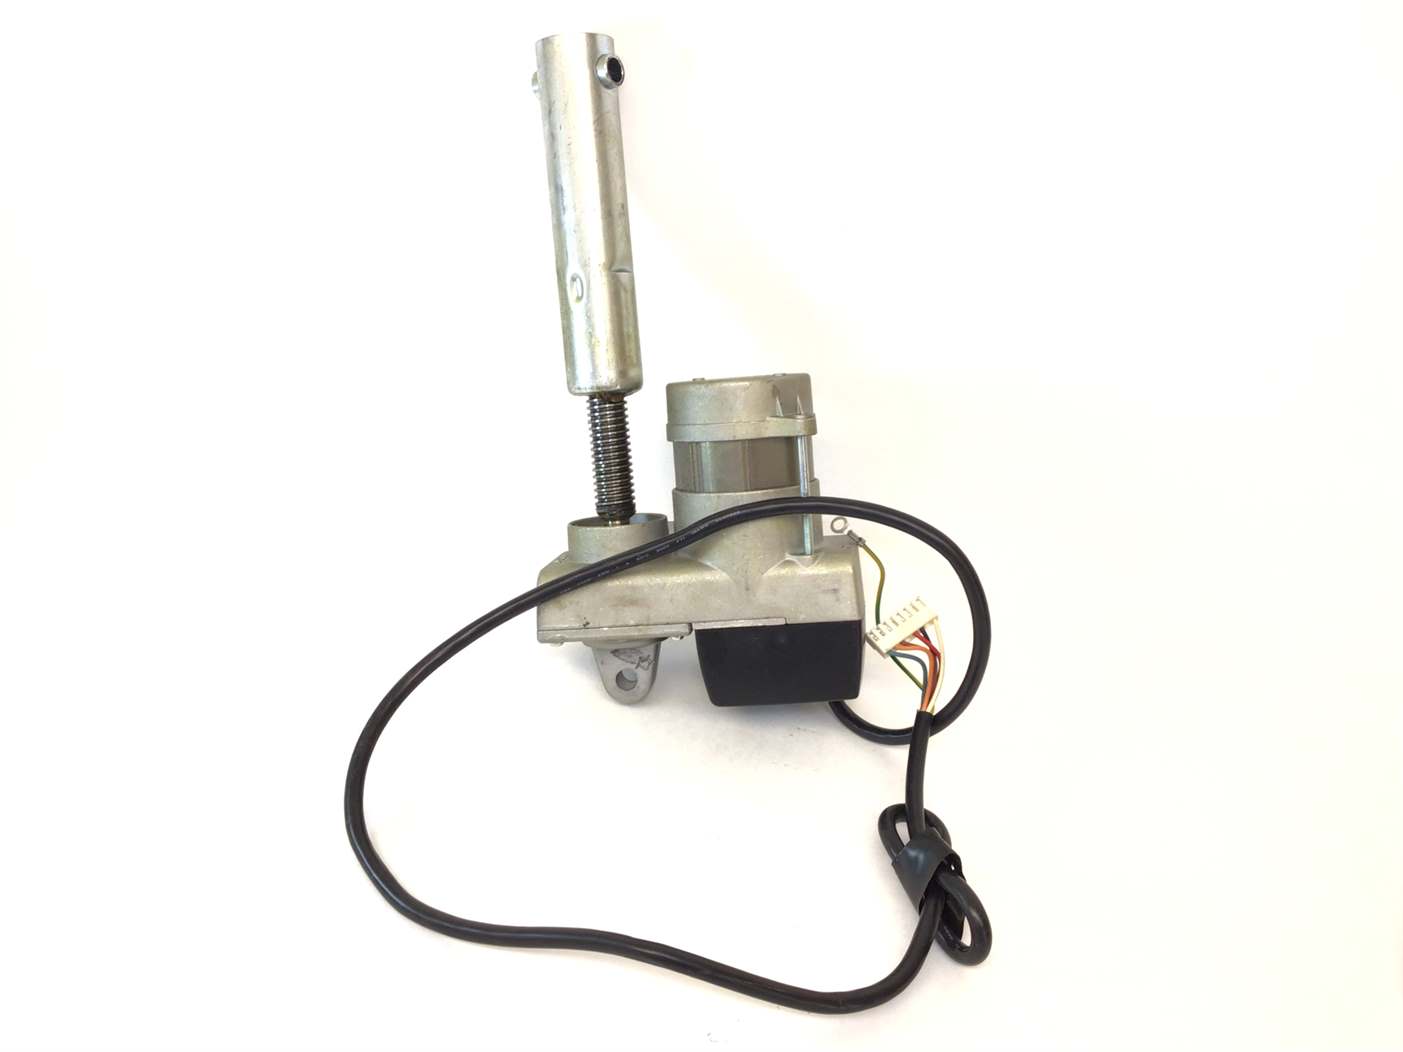 Incline Lift Elevation Motor Actuator (Used)